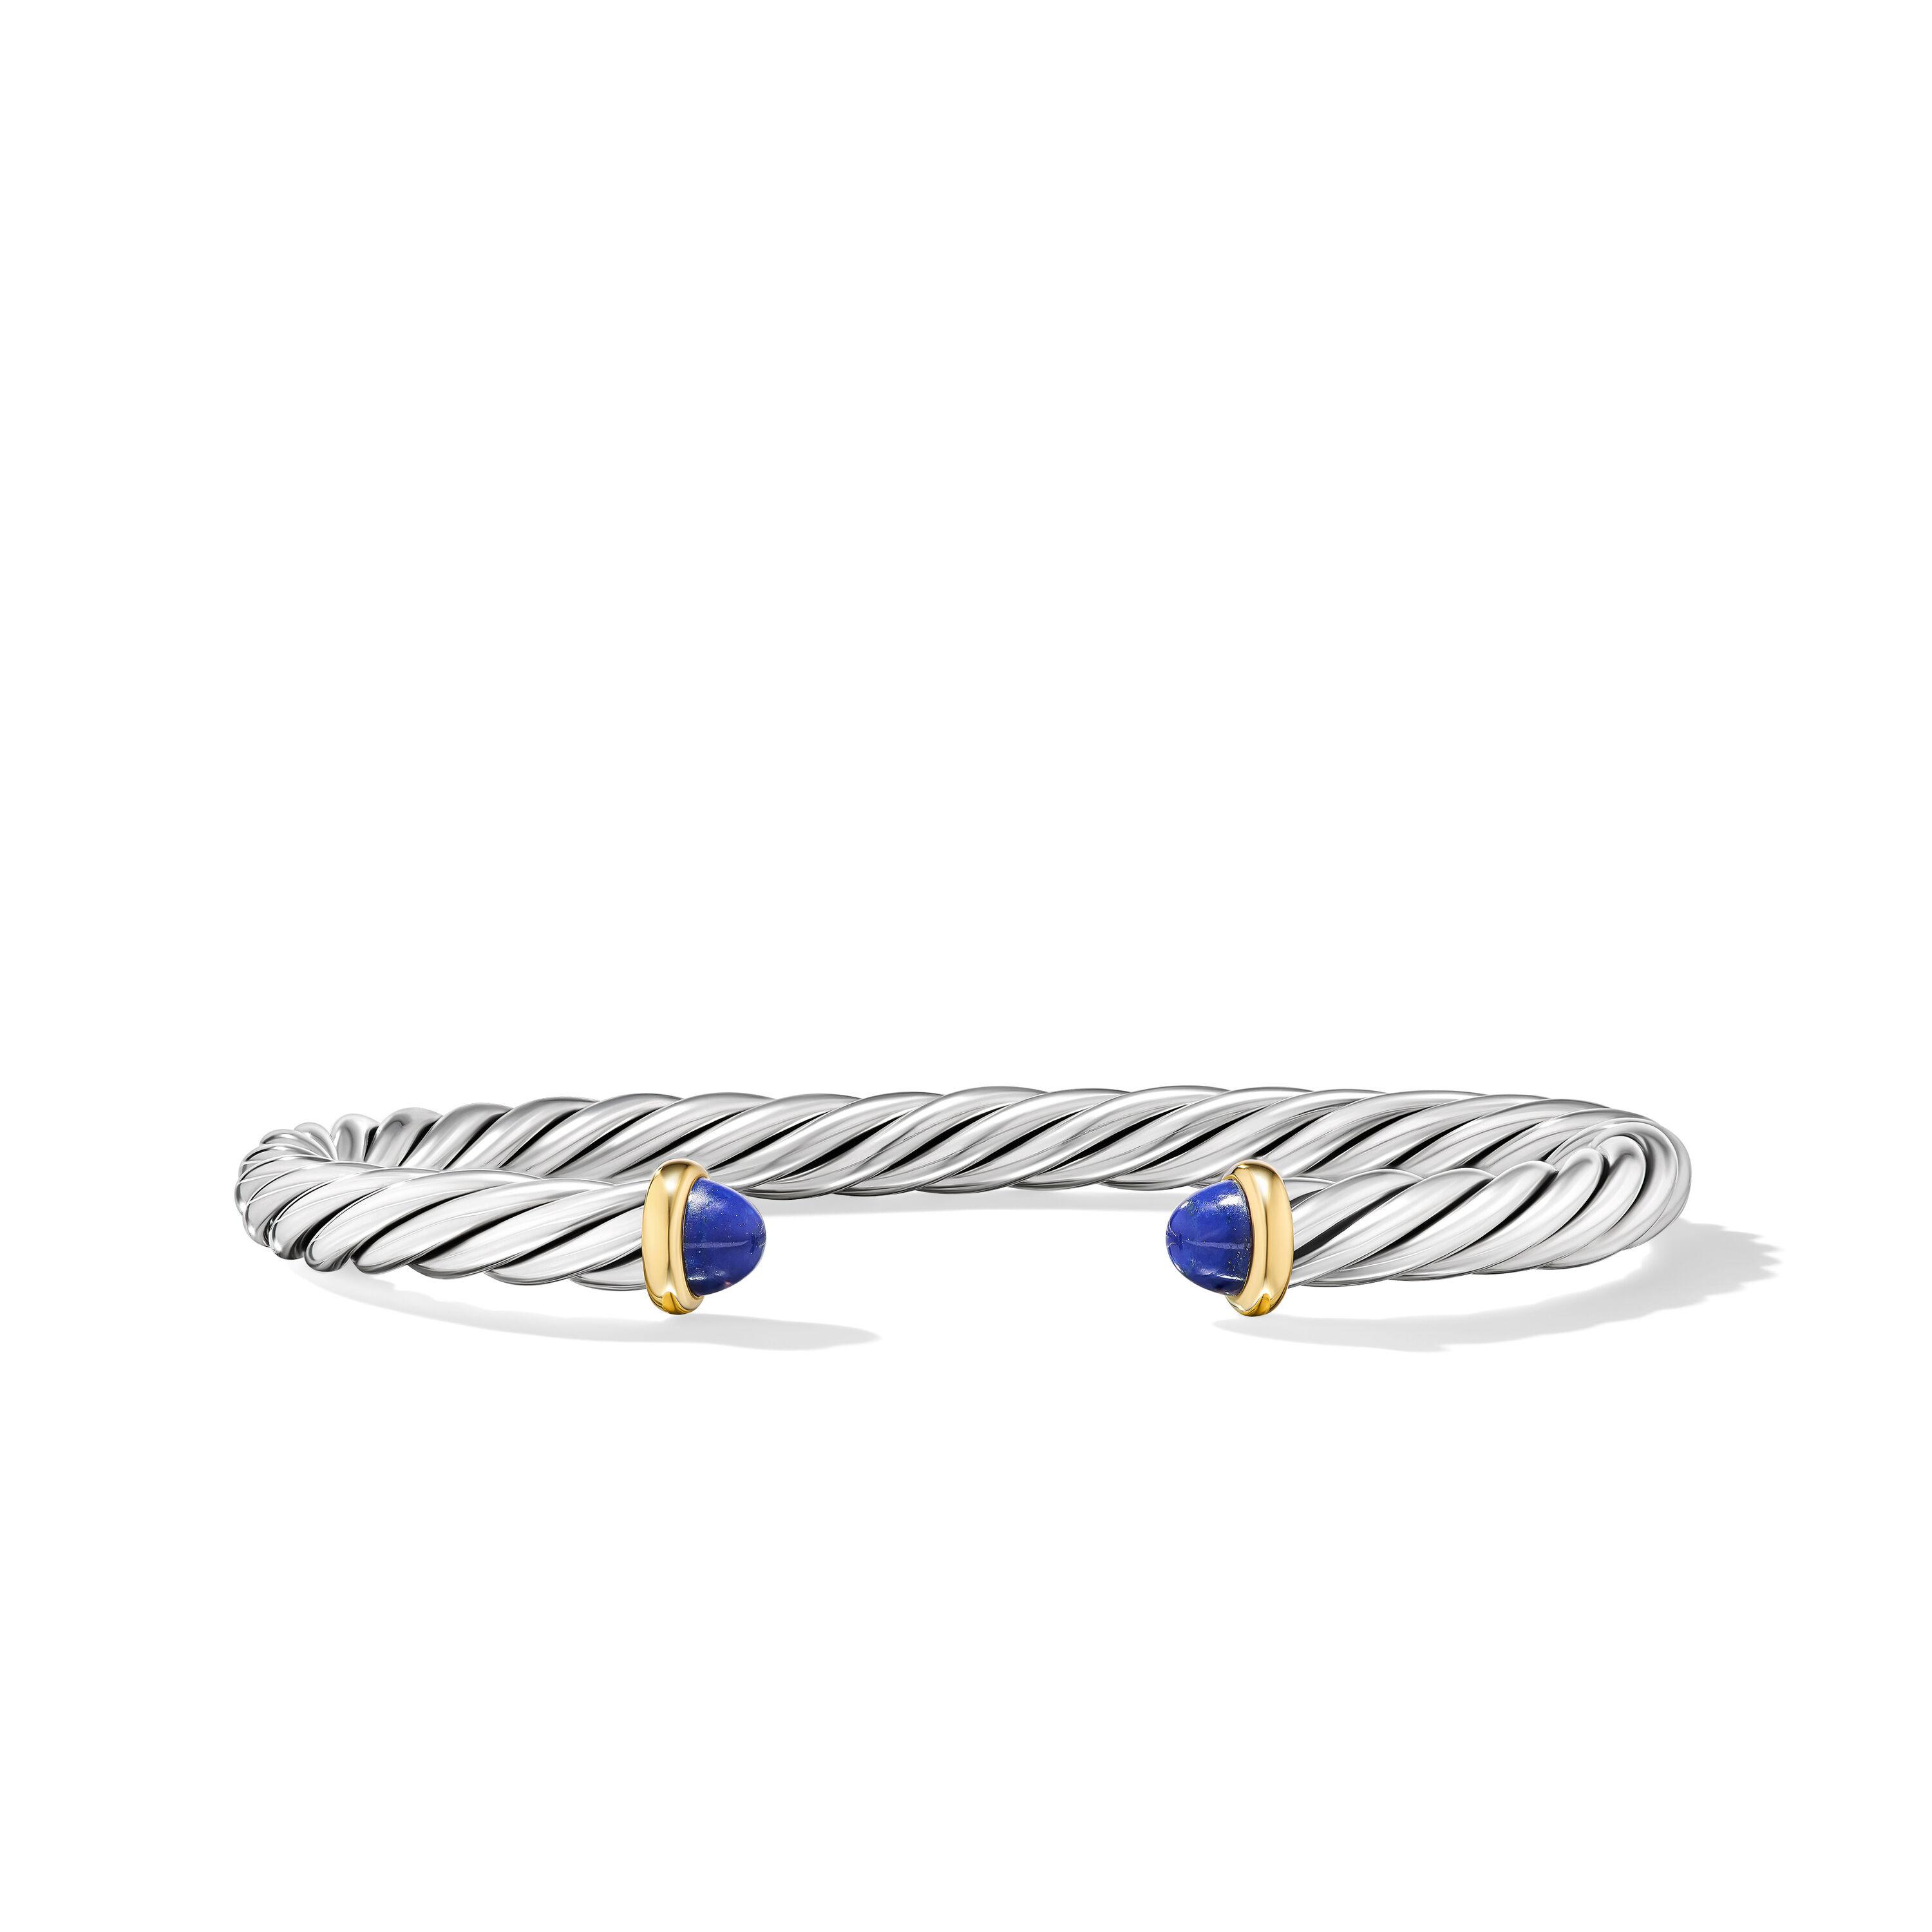 David Yurman 6mm Cable Cuff Bracelet in Sterling Silver with 14K Yellow Gold and Lapis, Medium